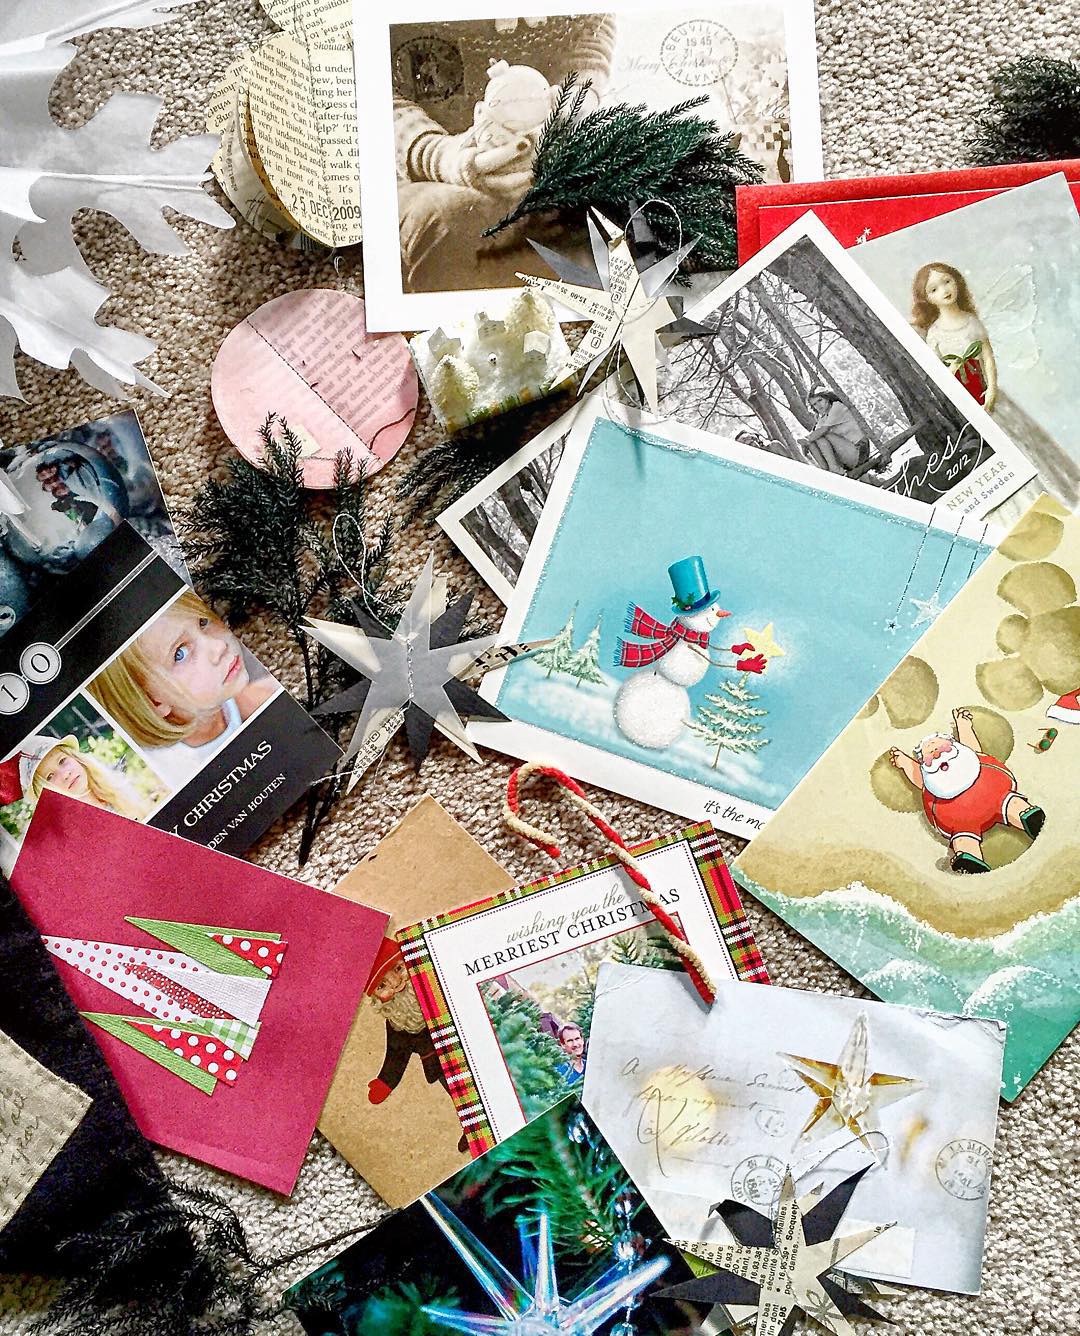 Different Varieties of Christmas Cards Spread Out on the Floor. Photo by Instagram user @tdoeswool